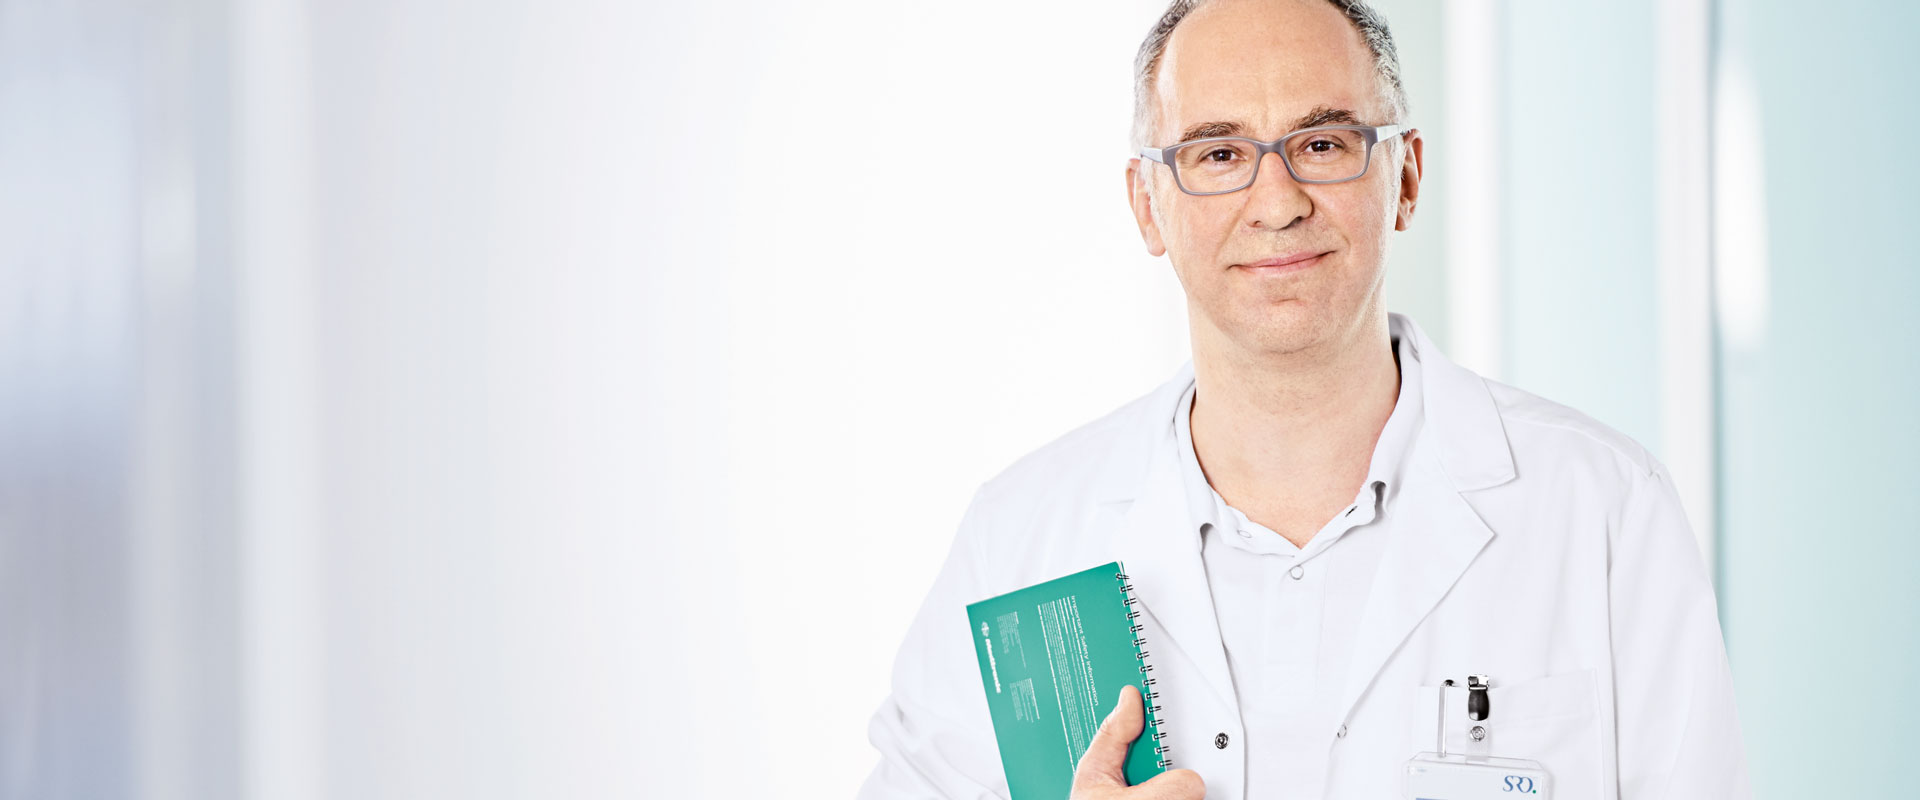 Dr. med. Michael Durband, Leitender Arzt Chirurgie